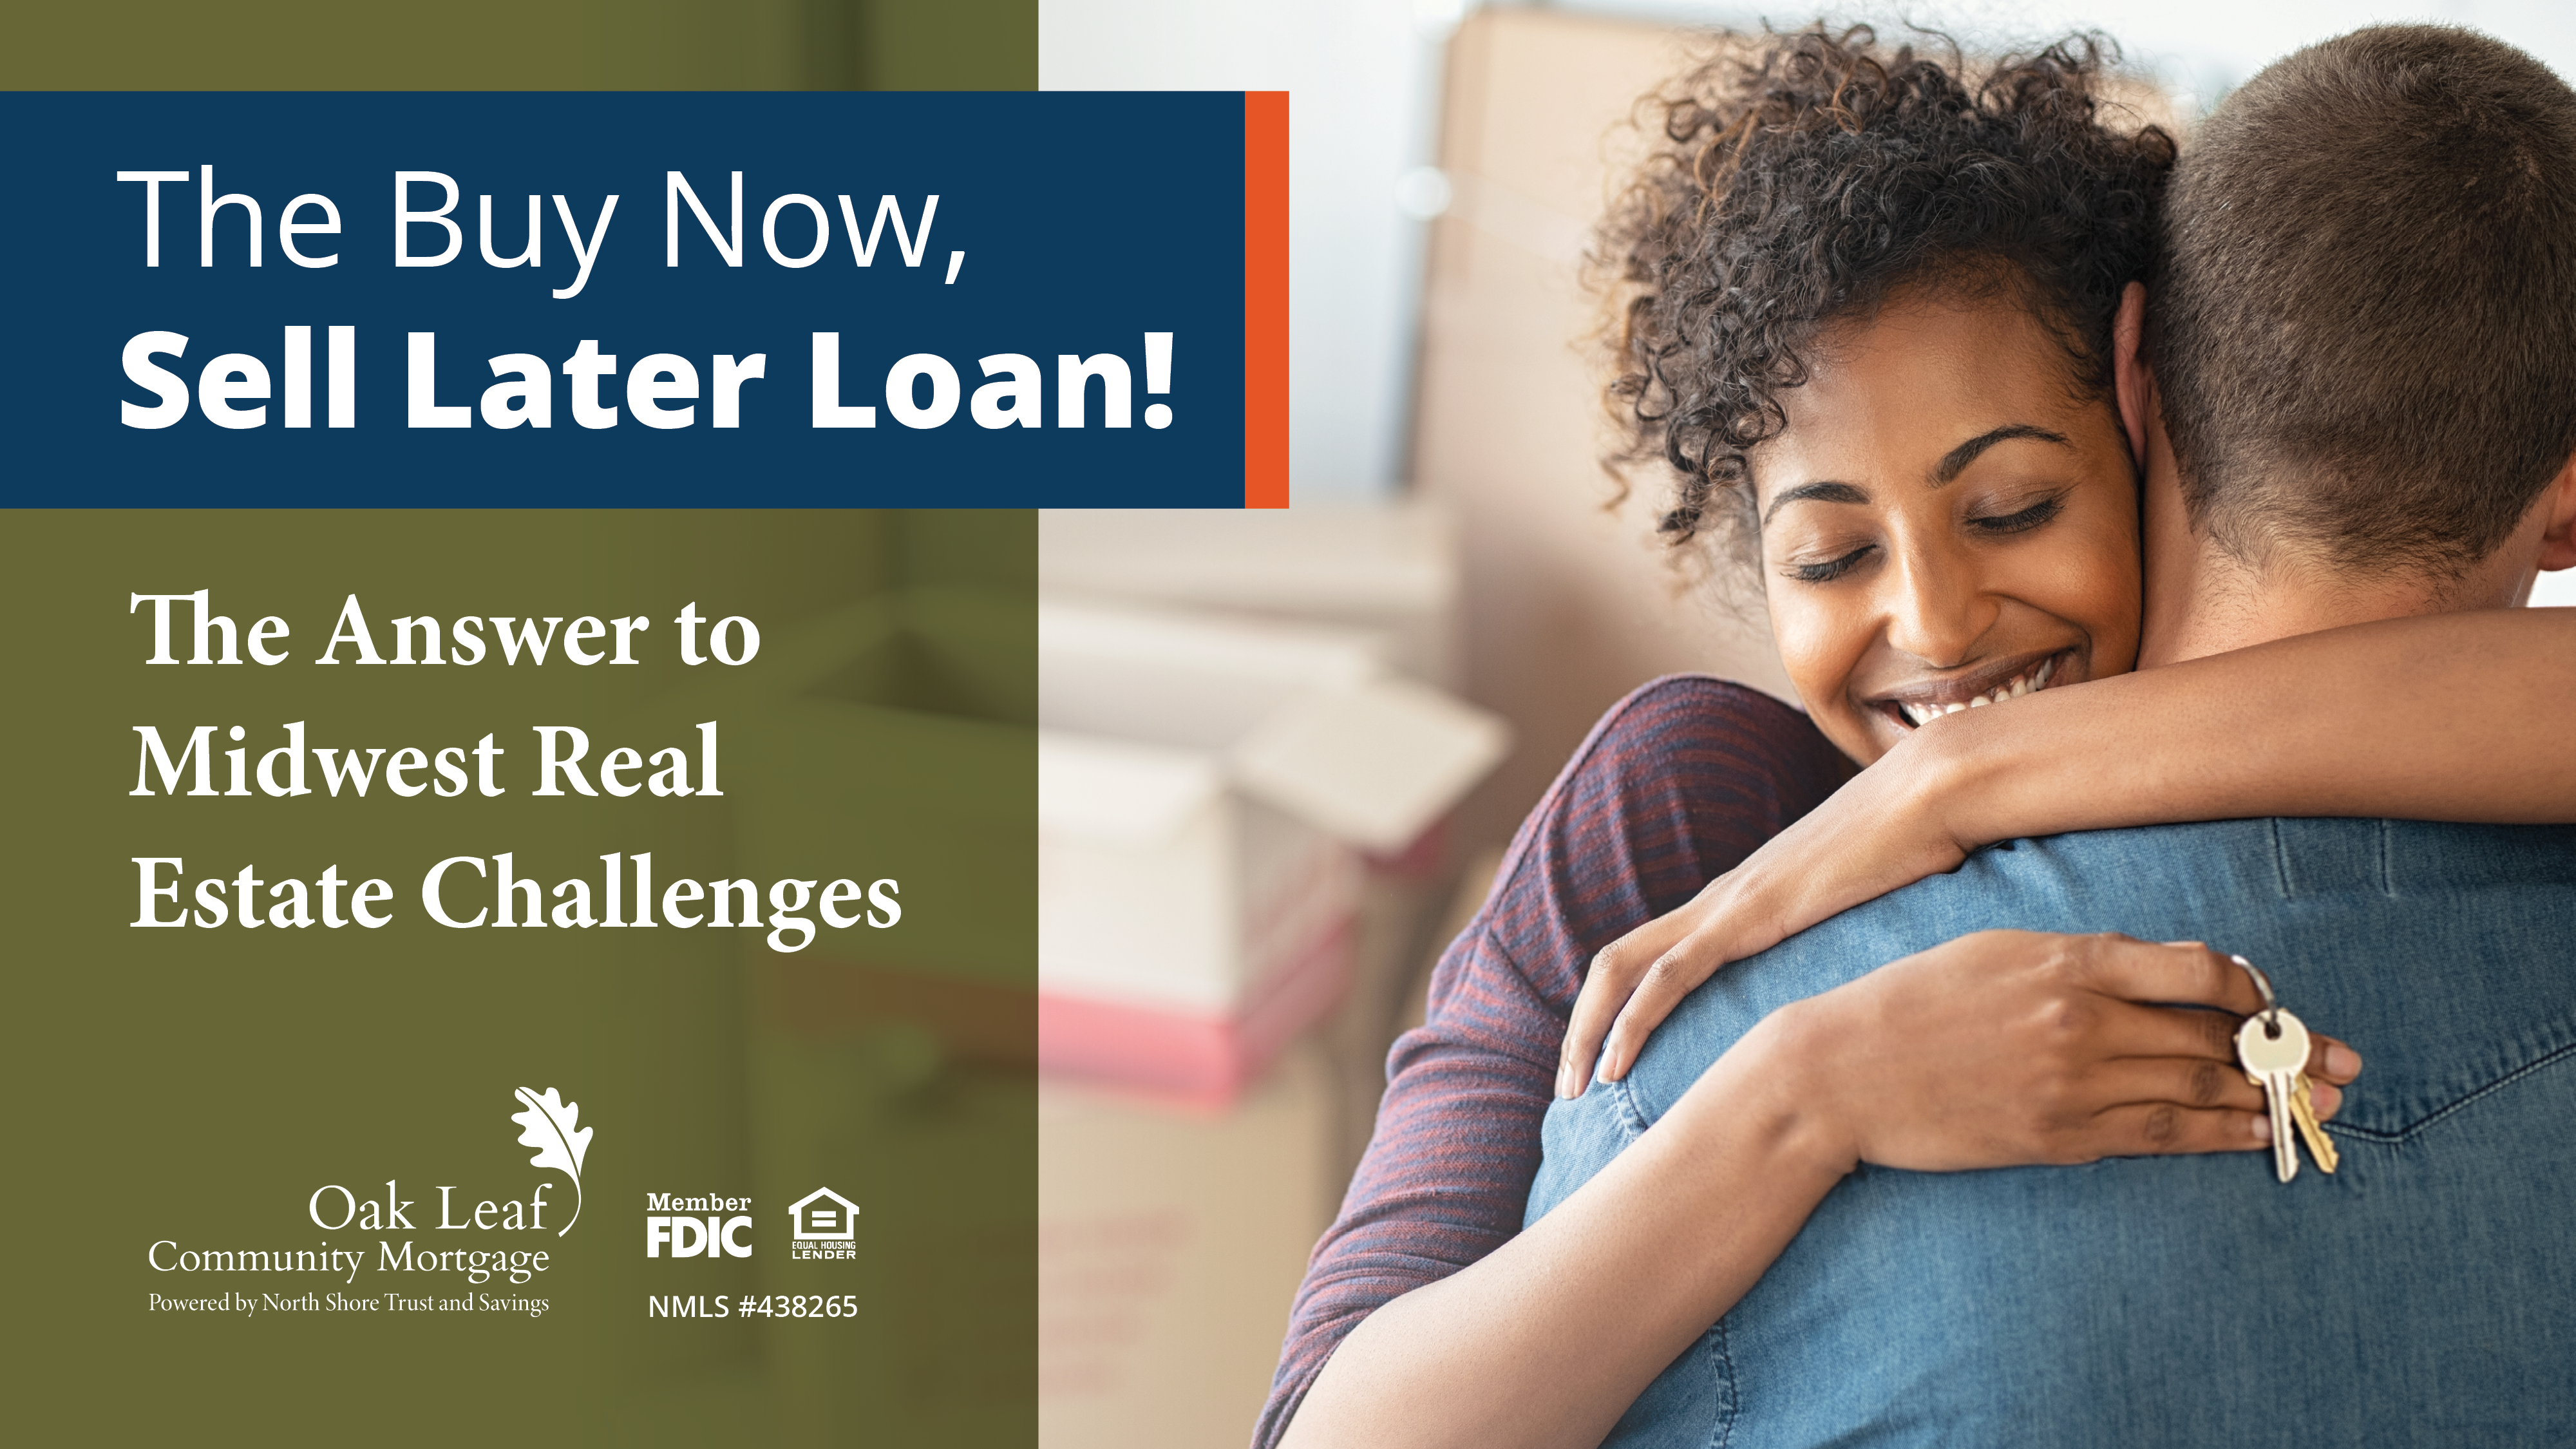 The Buy Now, Sell Later Loan is the Answer to Midwest Real Estate Challenges